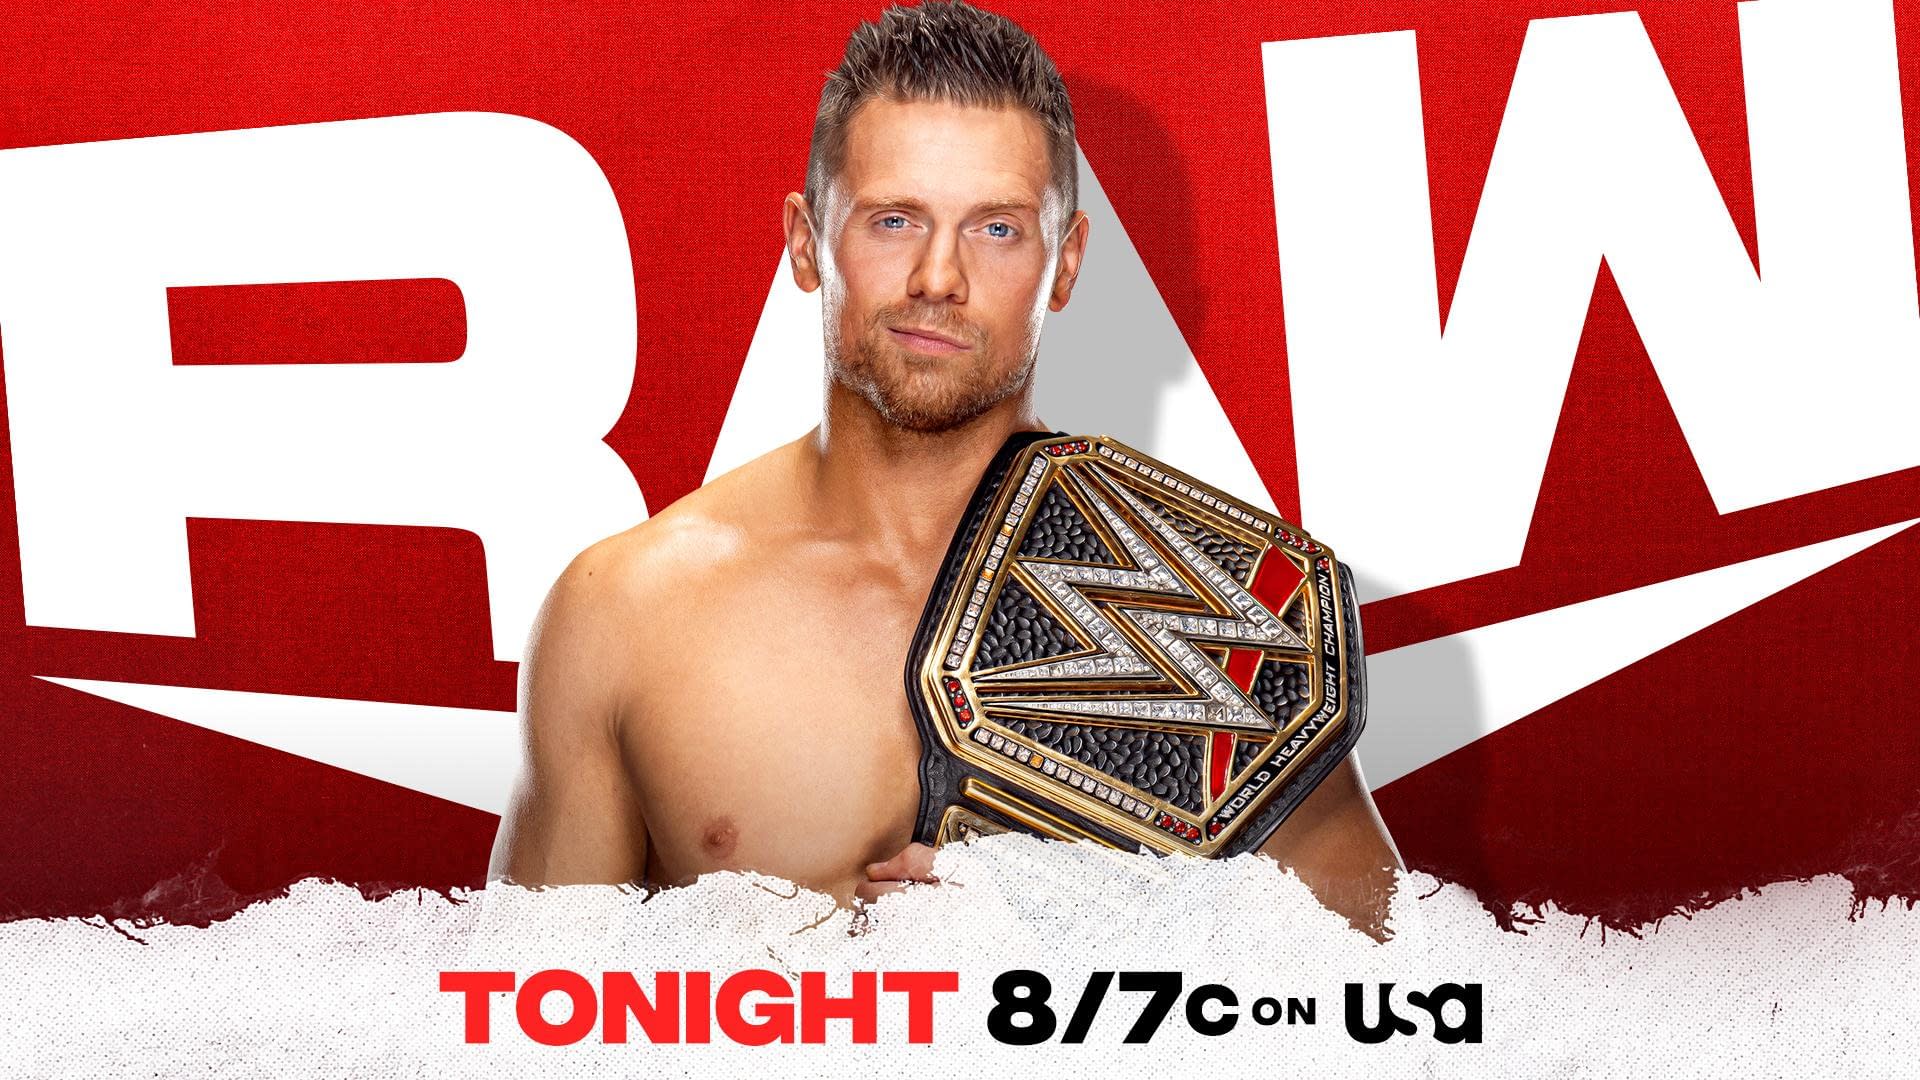 WWE Raw Preview Lists Just One Segment for Tonight Miz TV